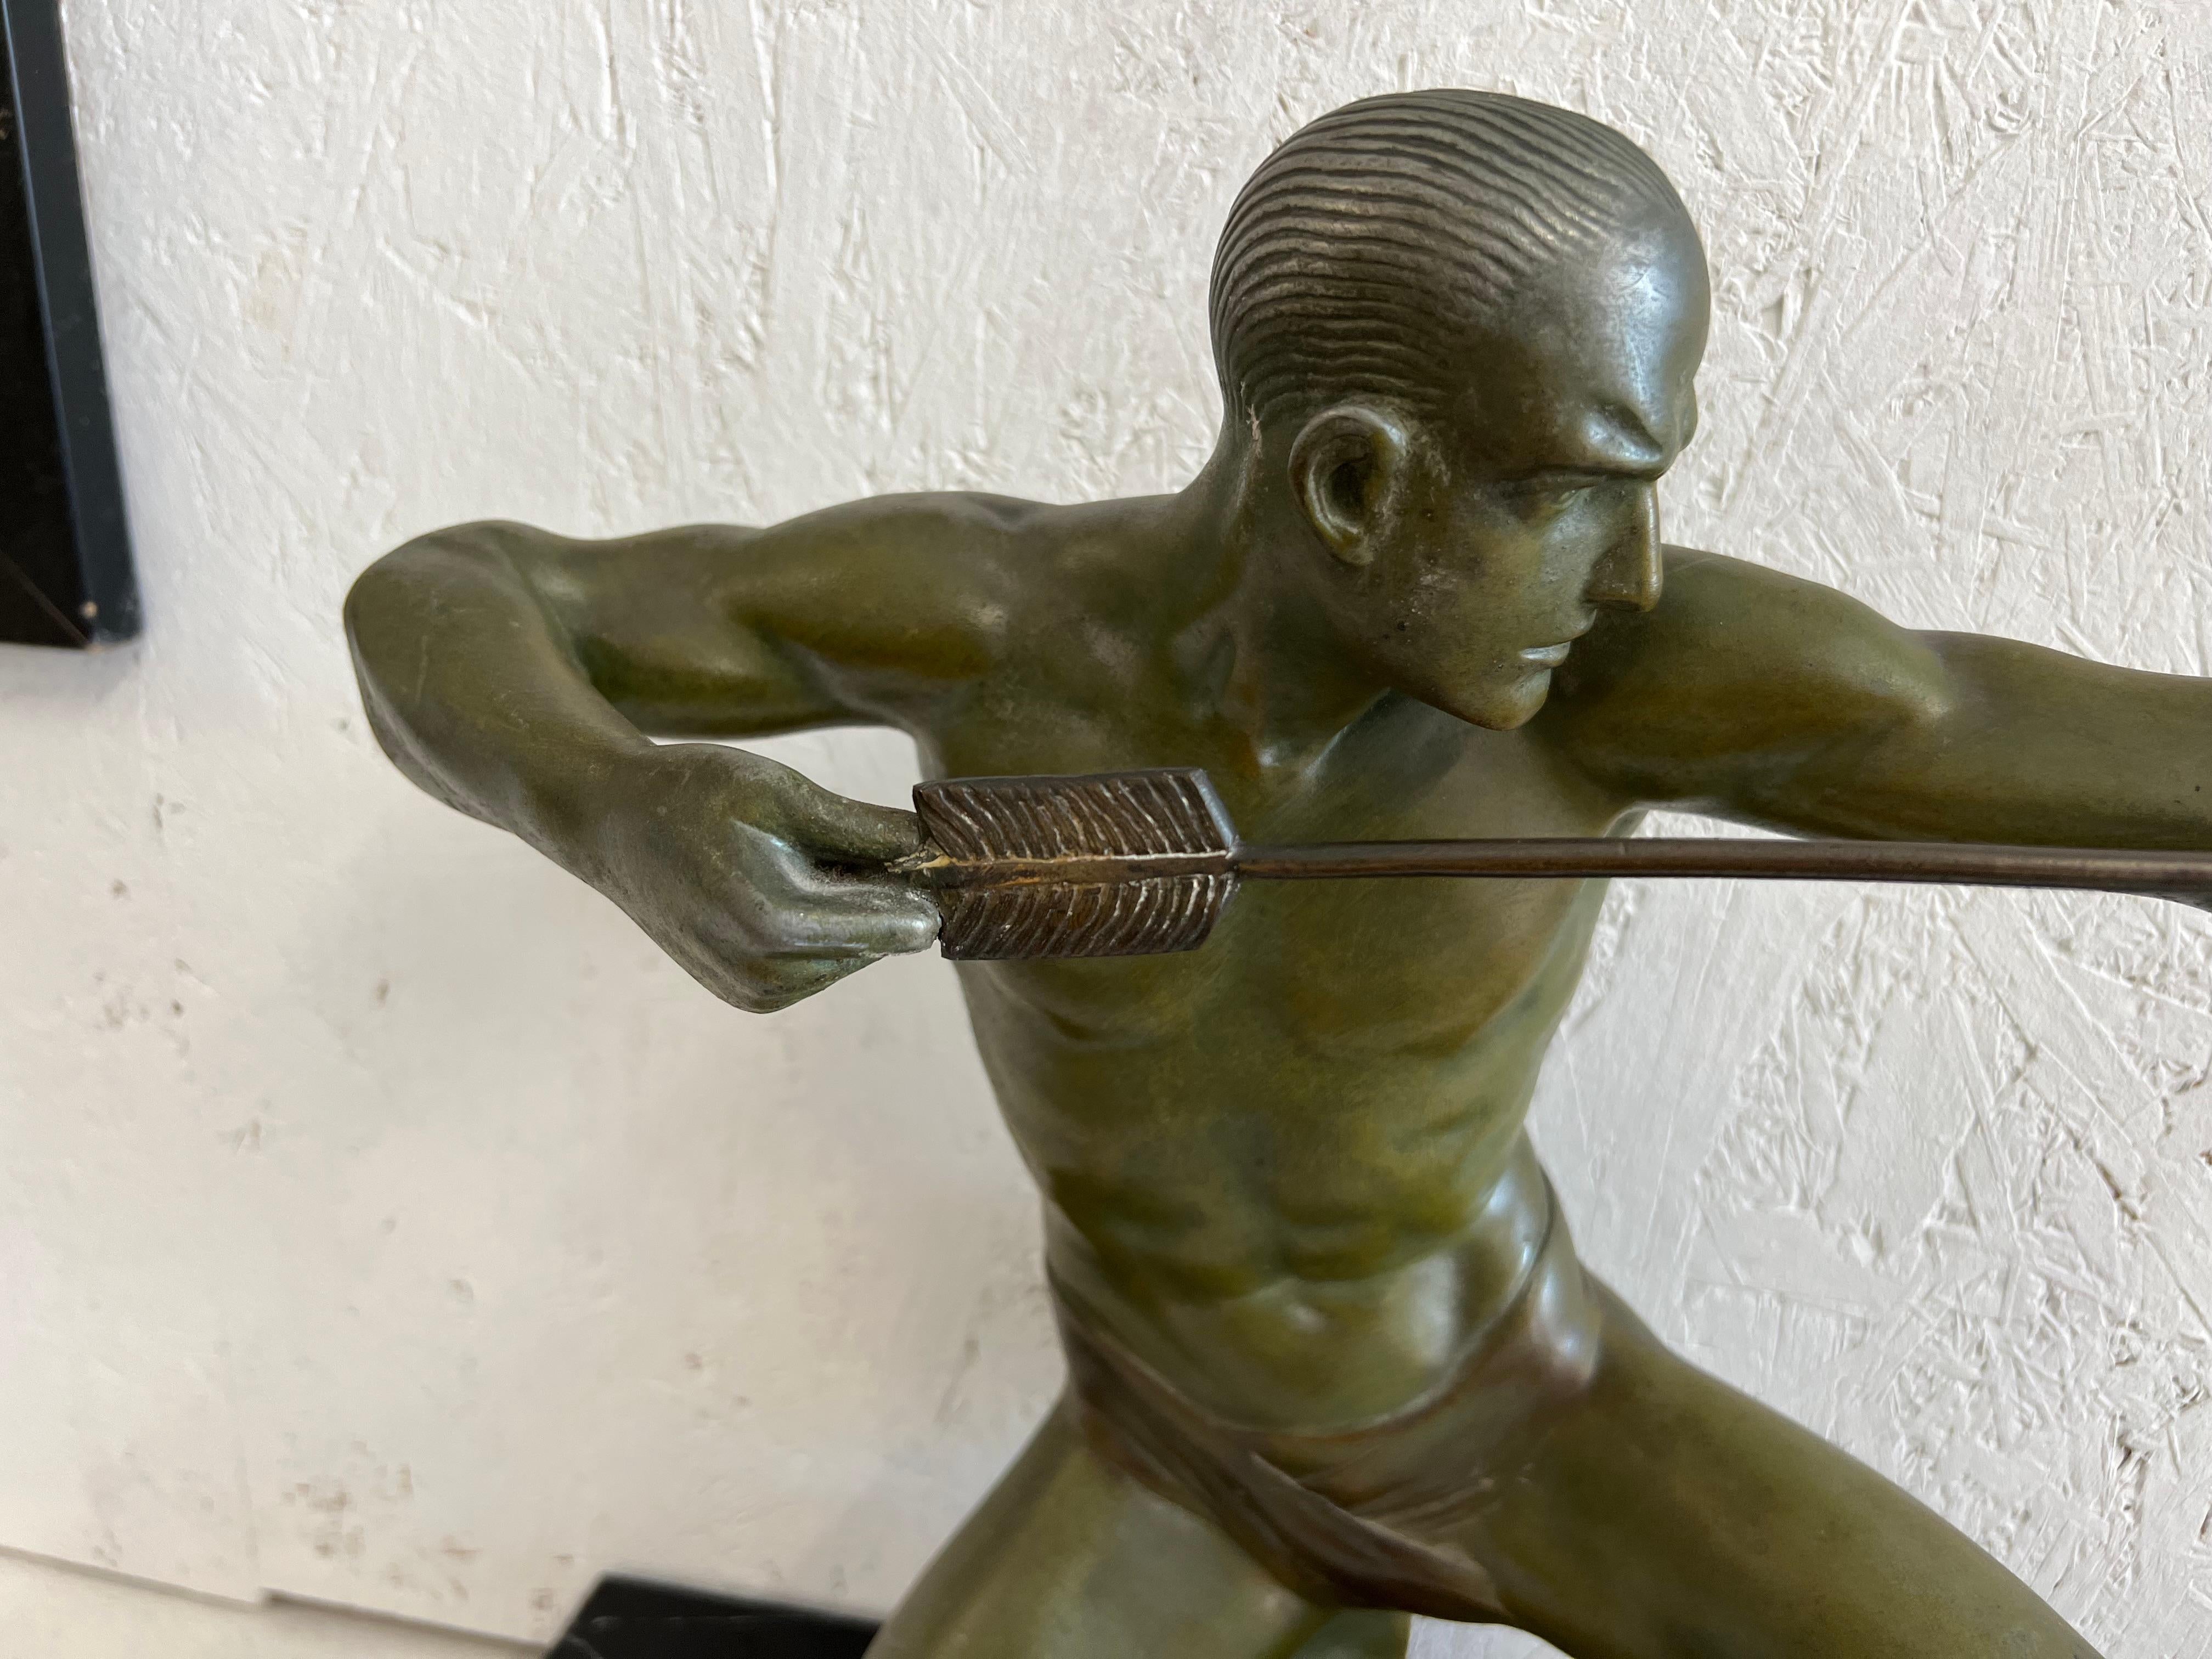 Great Art Déco sculpture archer by G .Darny
Nice patine « vert de bronze » 
Sculpture is signed on marble top
The archer is very sculptural and muscled with a nice finition of details

